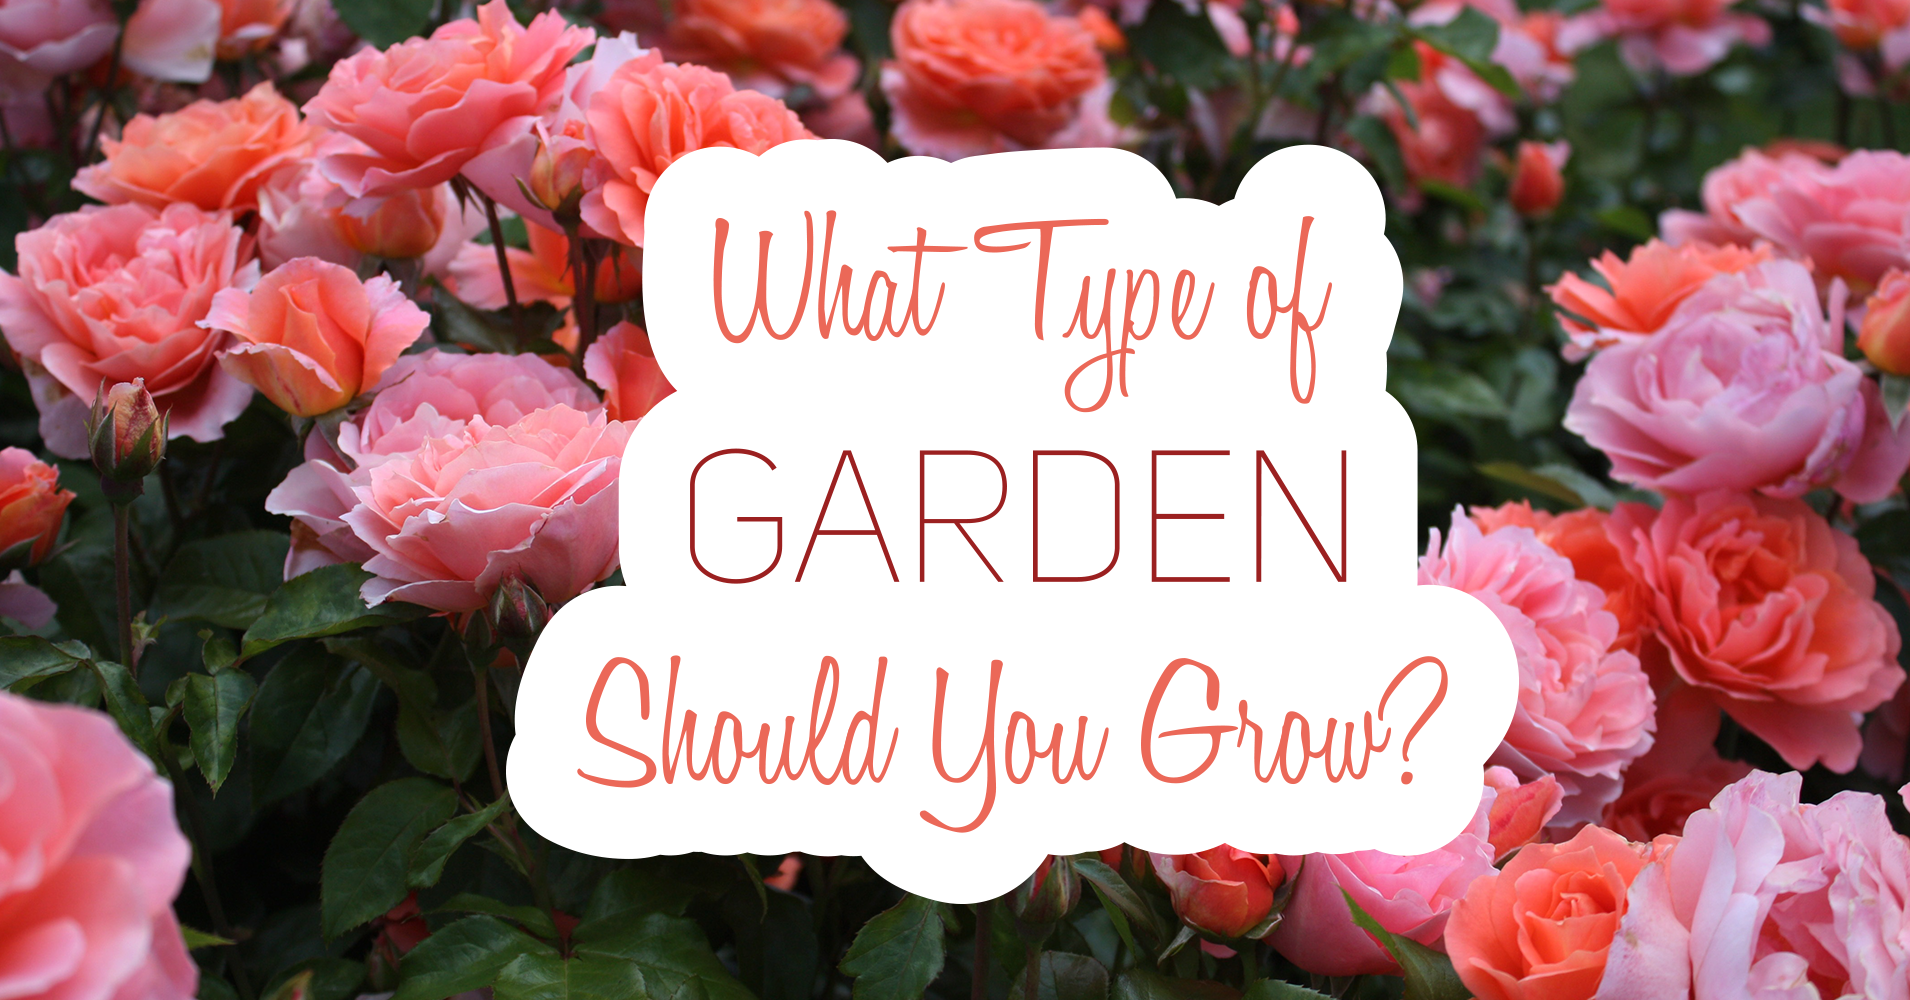 what-type-of-garden-should-you-grow-question-15-if-you-could-choose